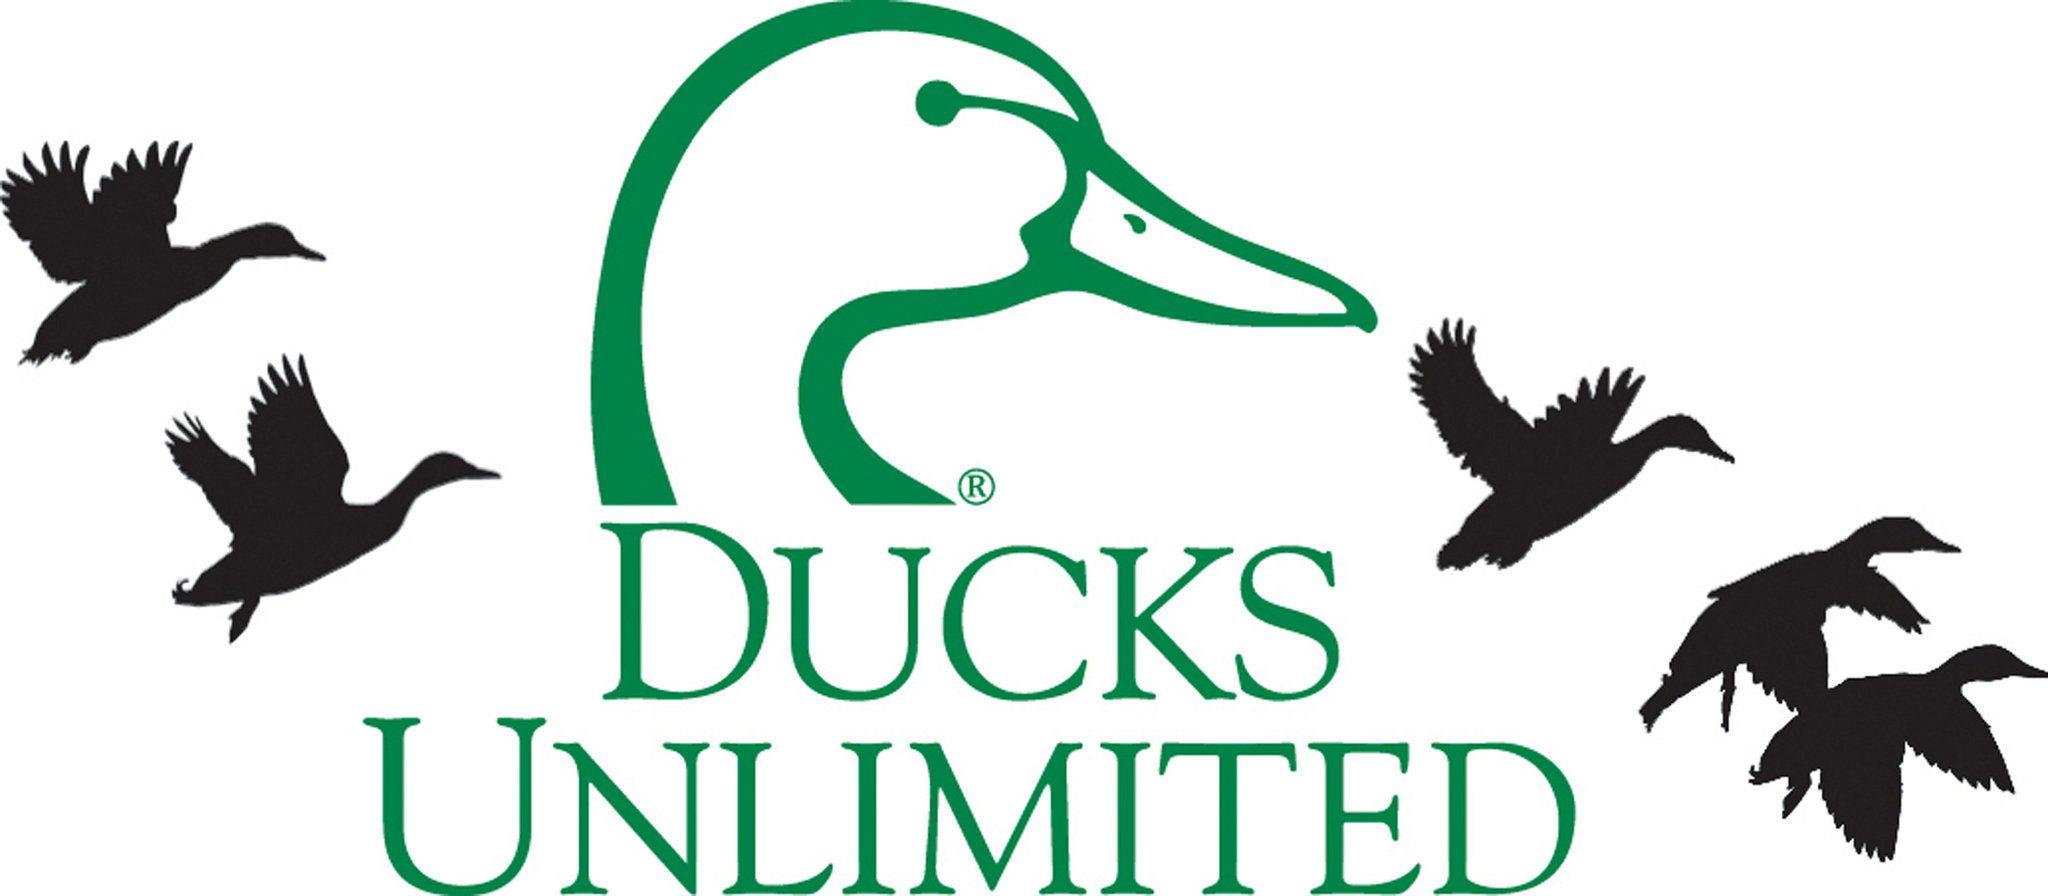 Ducks Unlimited Logo - Ducks Unlimited banquet fundraiser helps to preserve environment for ...